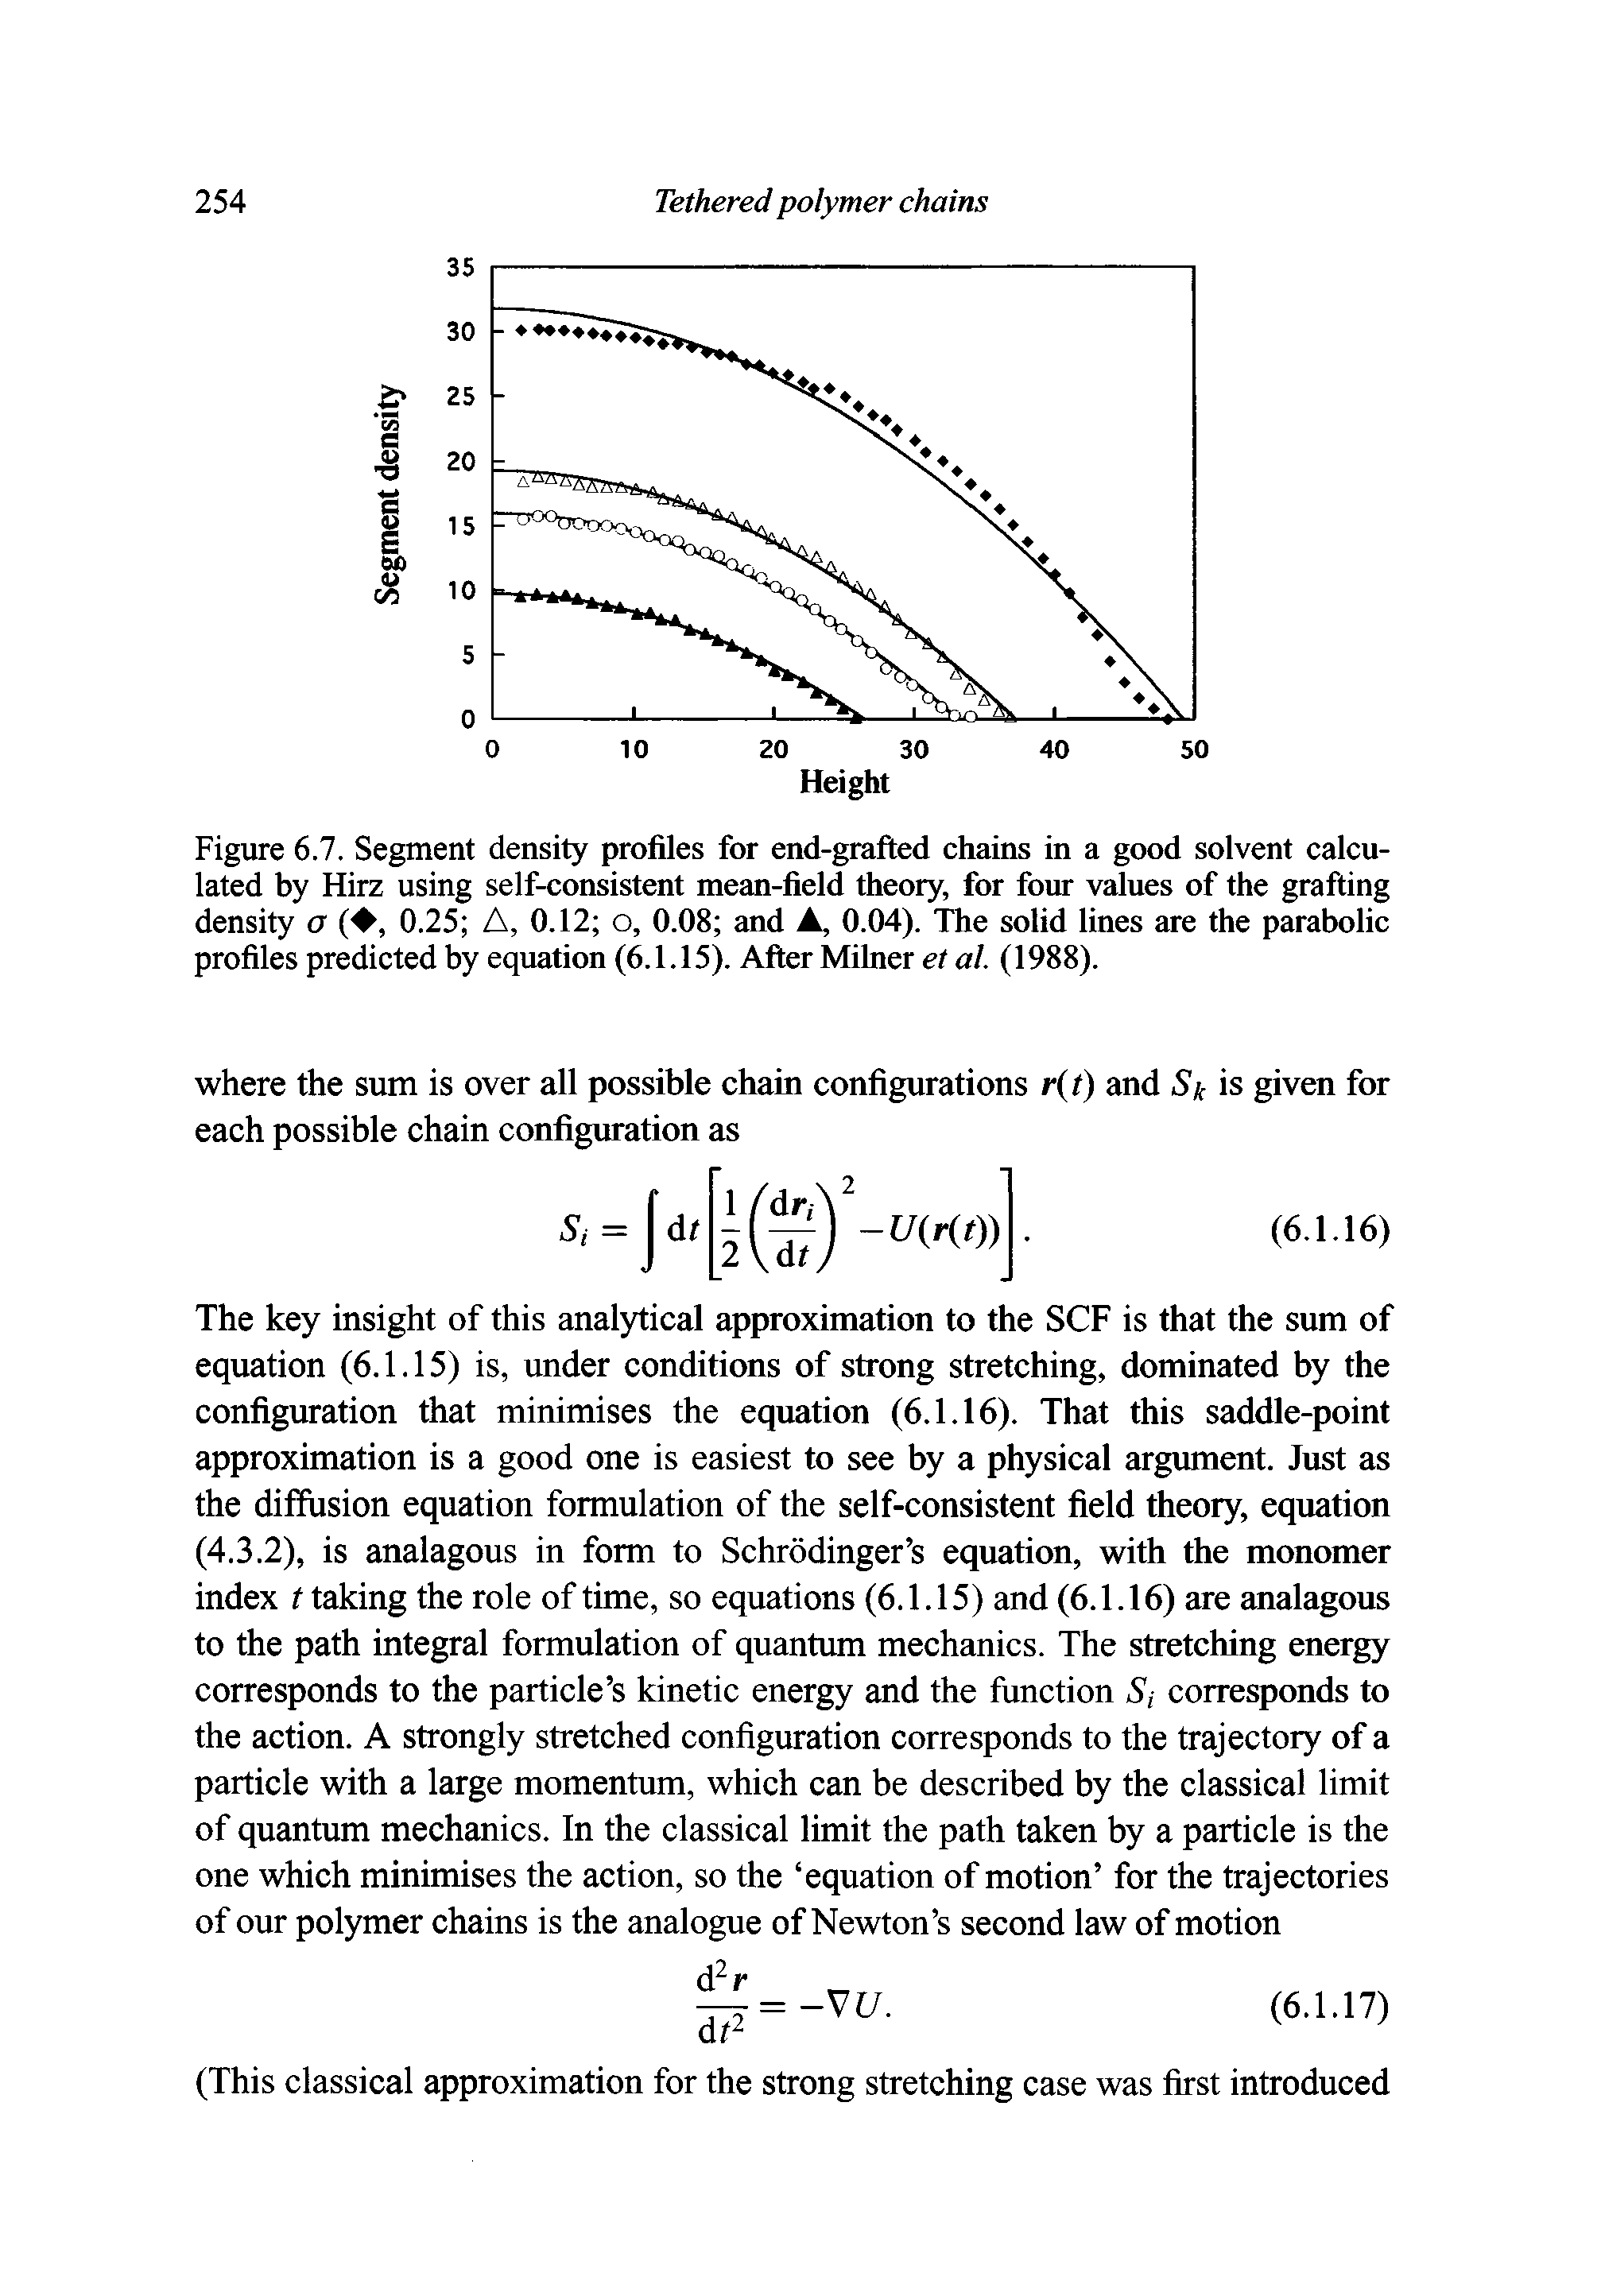 Figure 6.7. Segment density profiles for end-grafted chains in a good solvent calculated by Hirz using self-consistent mean-field theory, for four values of the grafting density o ( , 0.25 A, 0.12 o, 0.08 and A, 0.04). The solid lines are the parabolic profiles predicted by equation (6.1.15). After Milner et al. (1988).